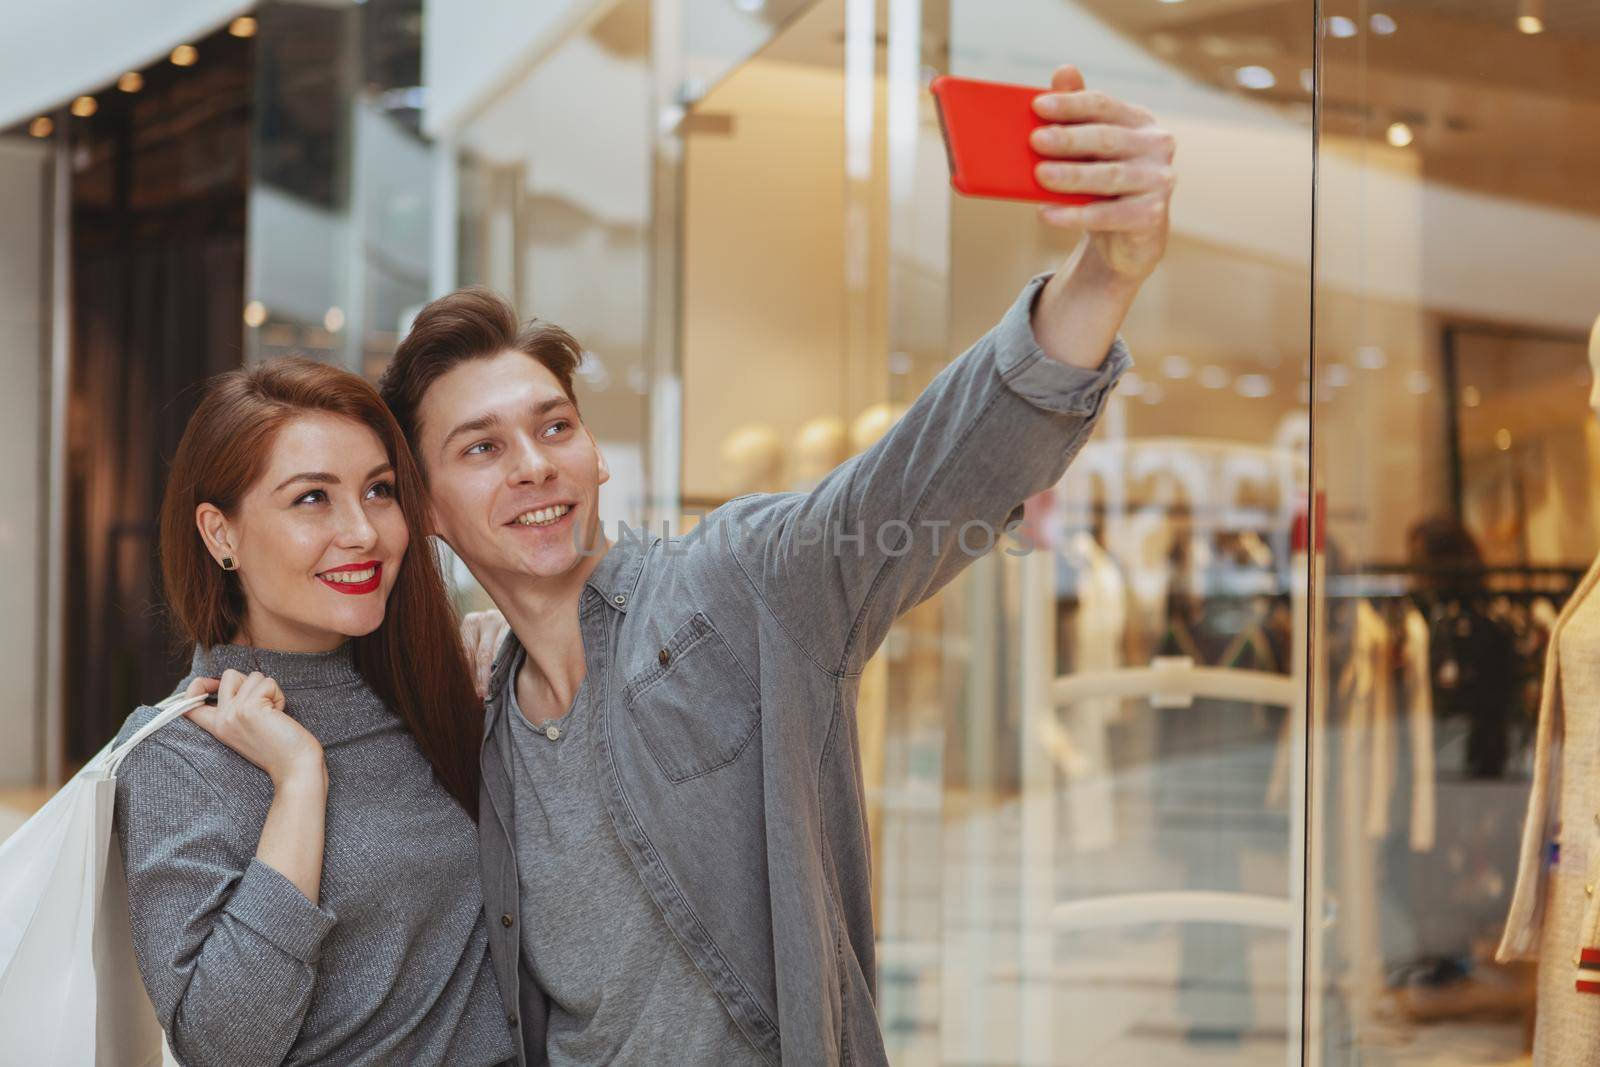 Handsome cheerful man taking selfies with his beautiful girlfriend, using smart phone at the shopping mall, copy space. Technology, social media, blogging lifestyle concept